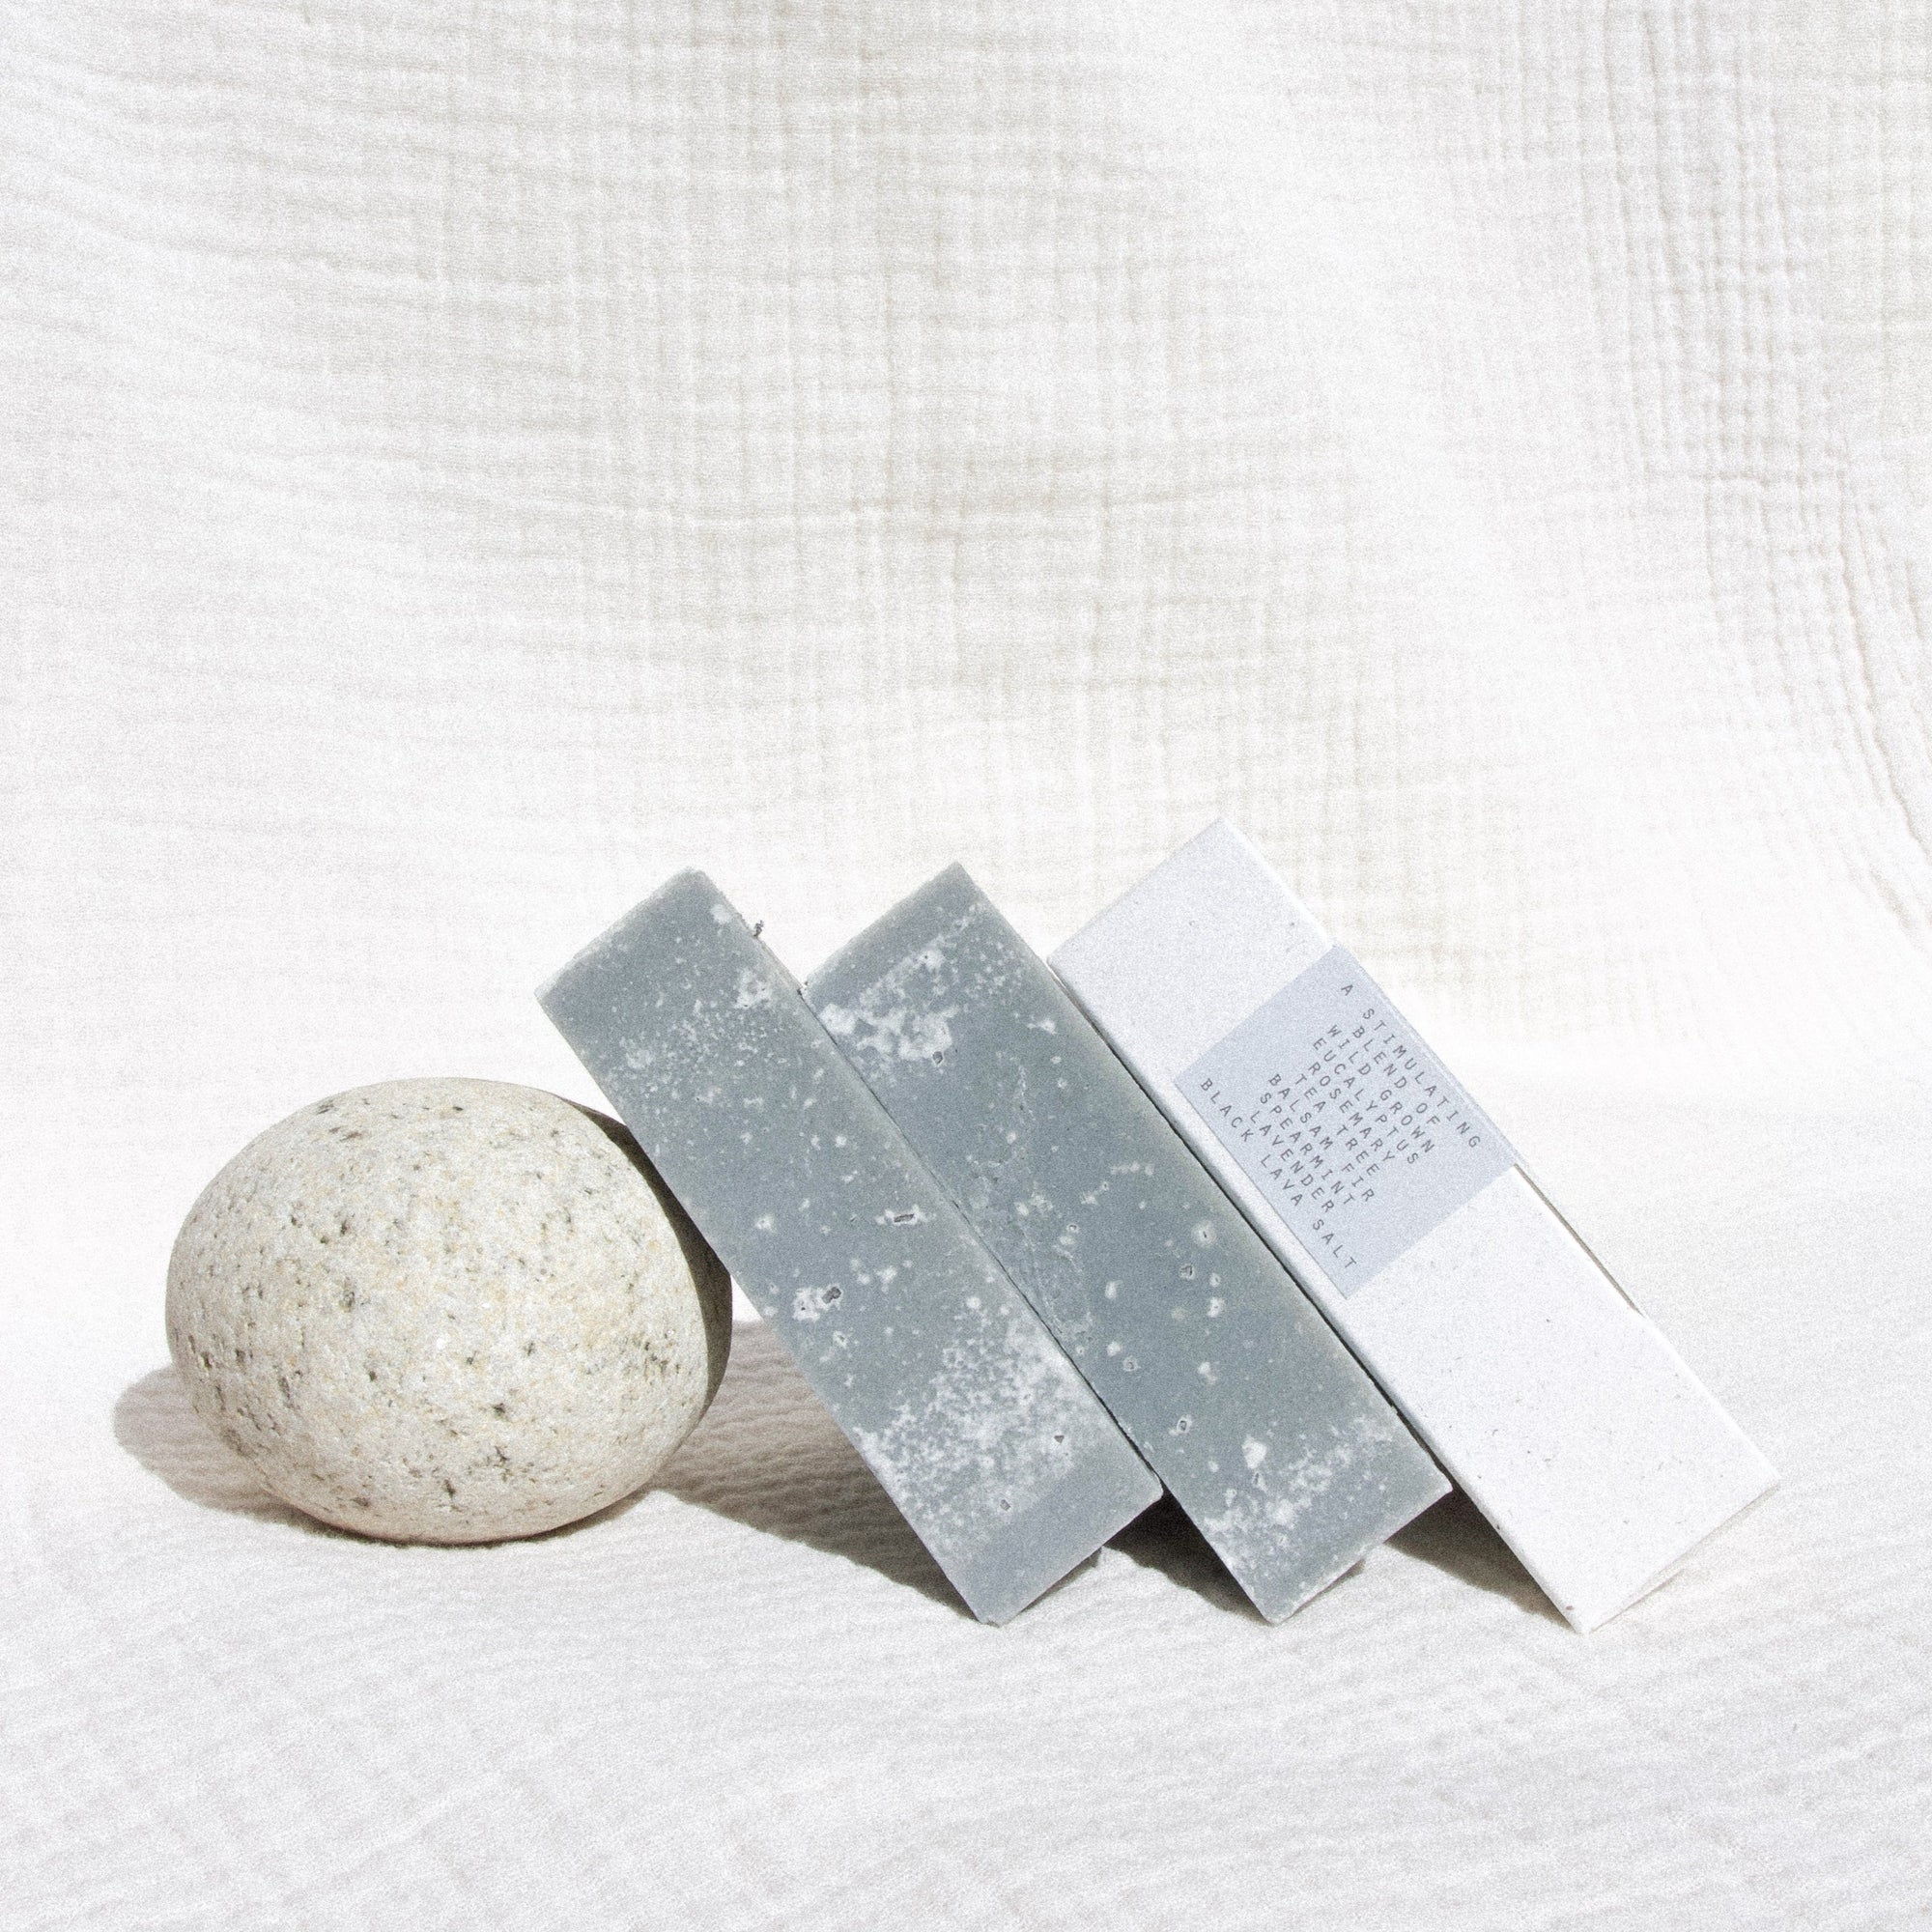 Three soap leaning against a round rock against textured linen